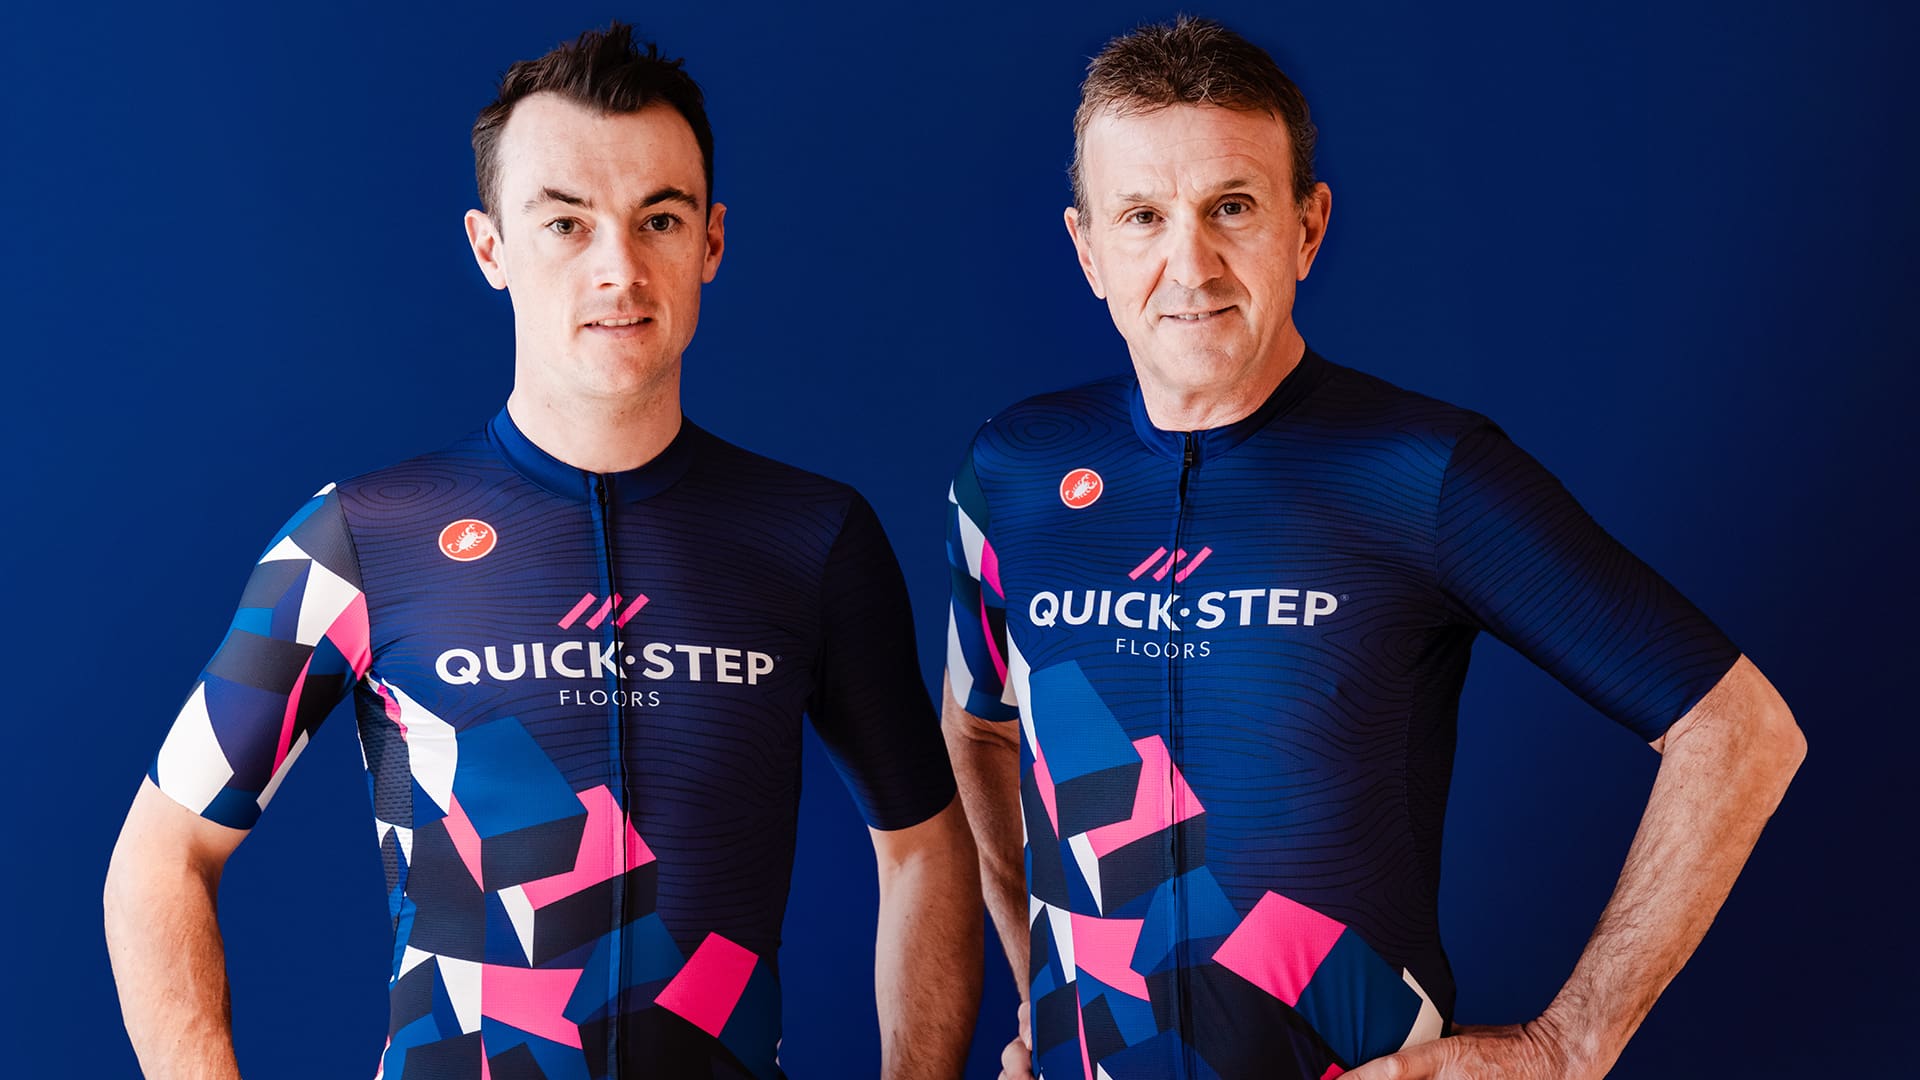 Quick-Step special edition jersey